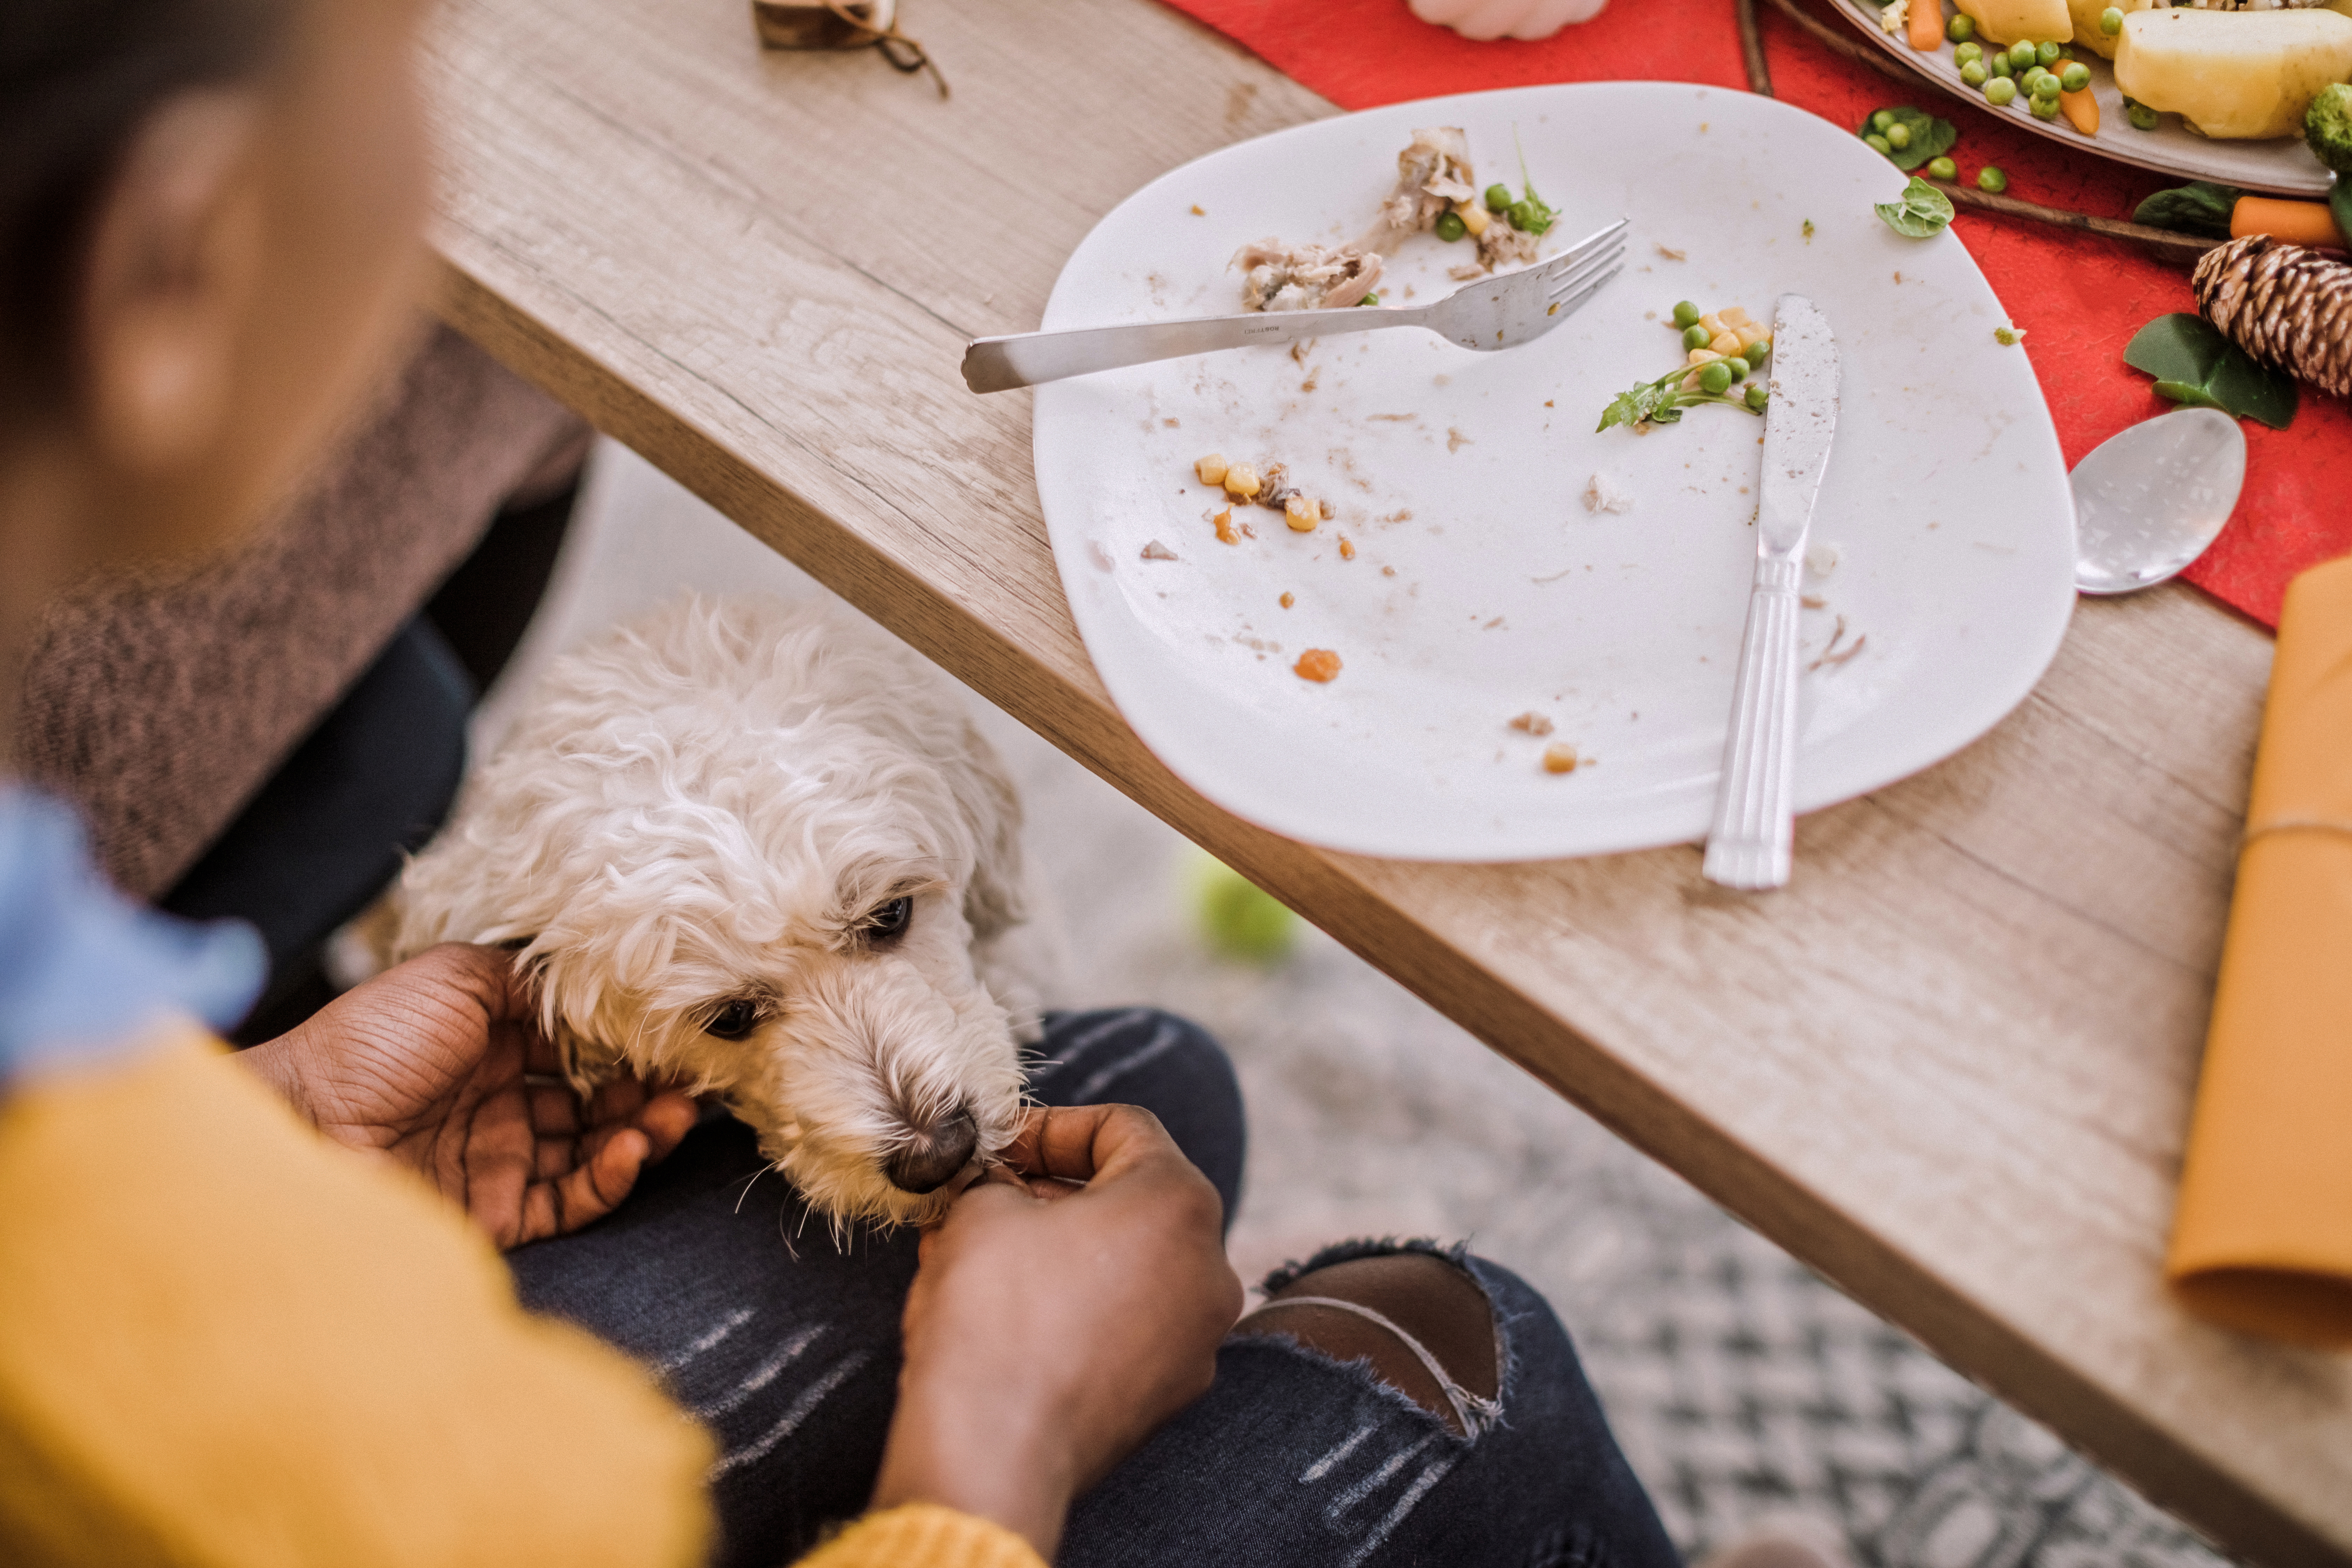 12 Foods To Avoid Feeding Your Dog This Christmas